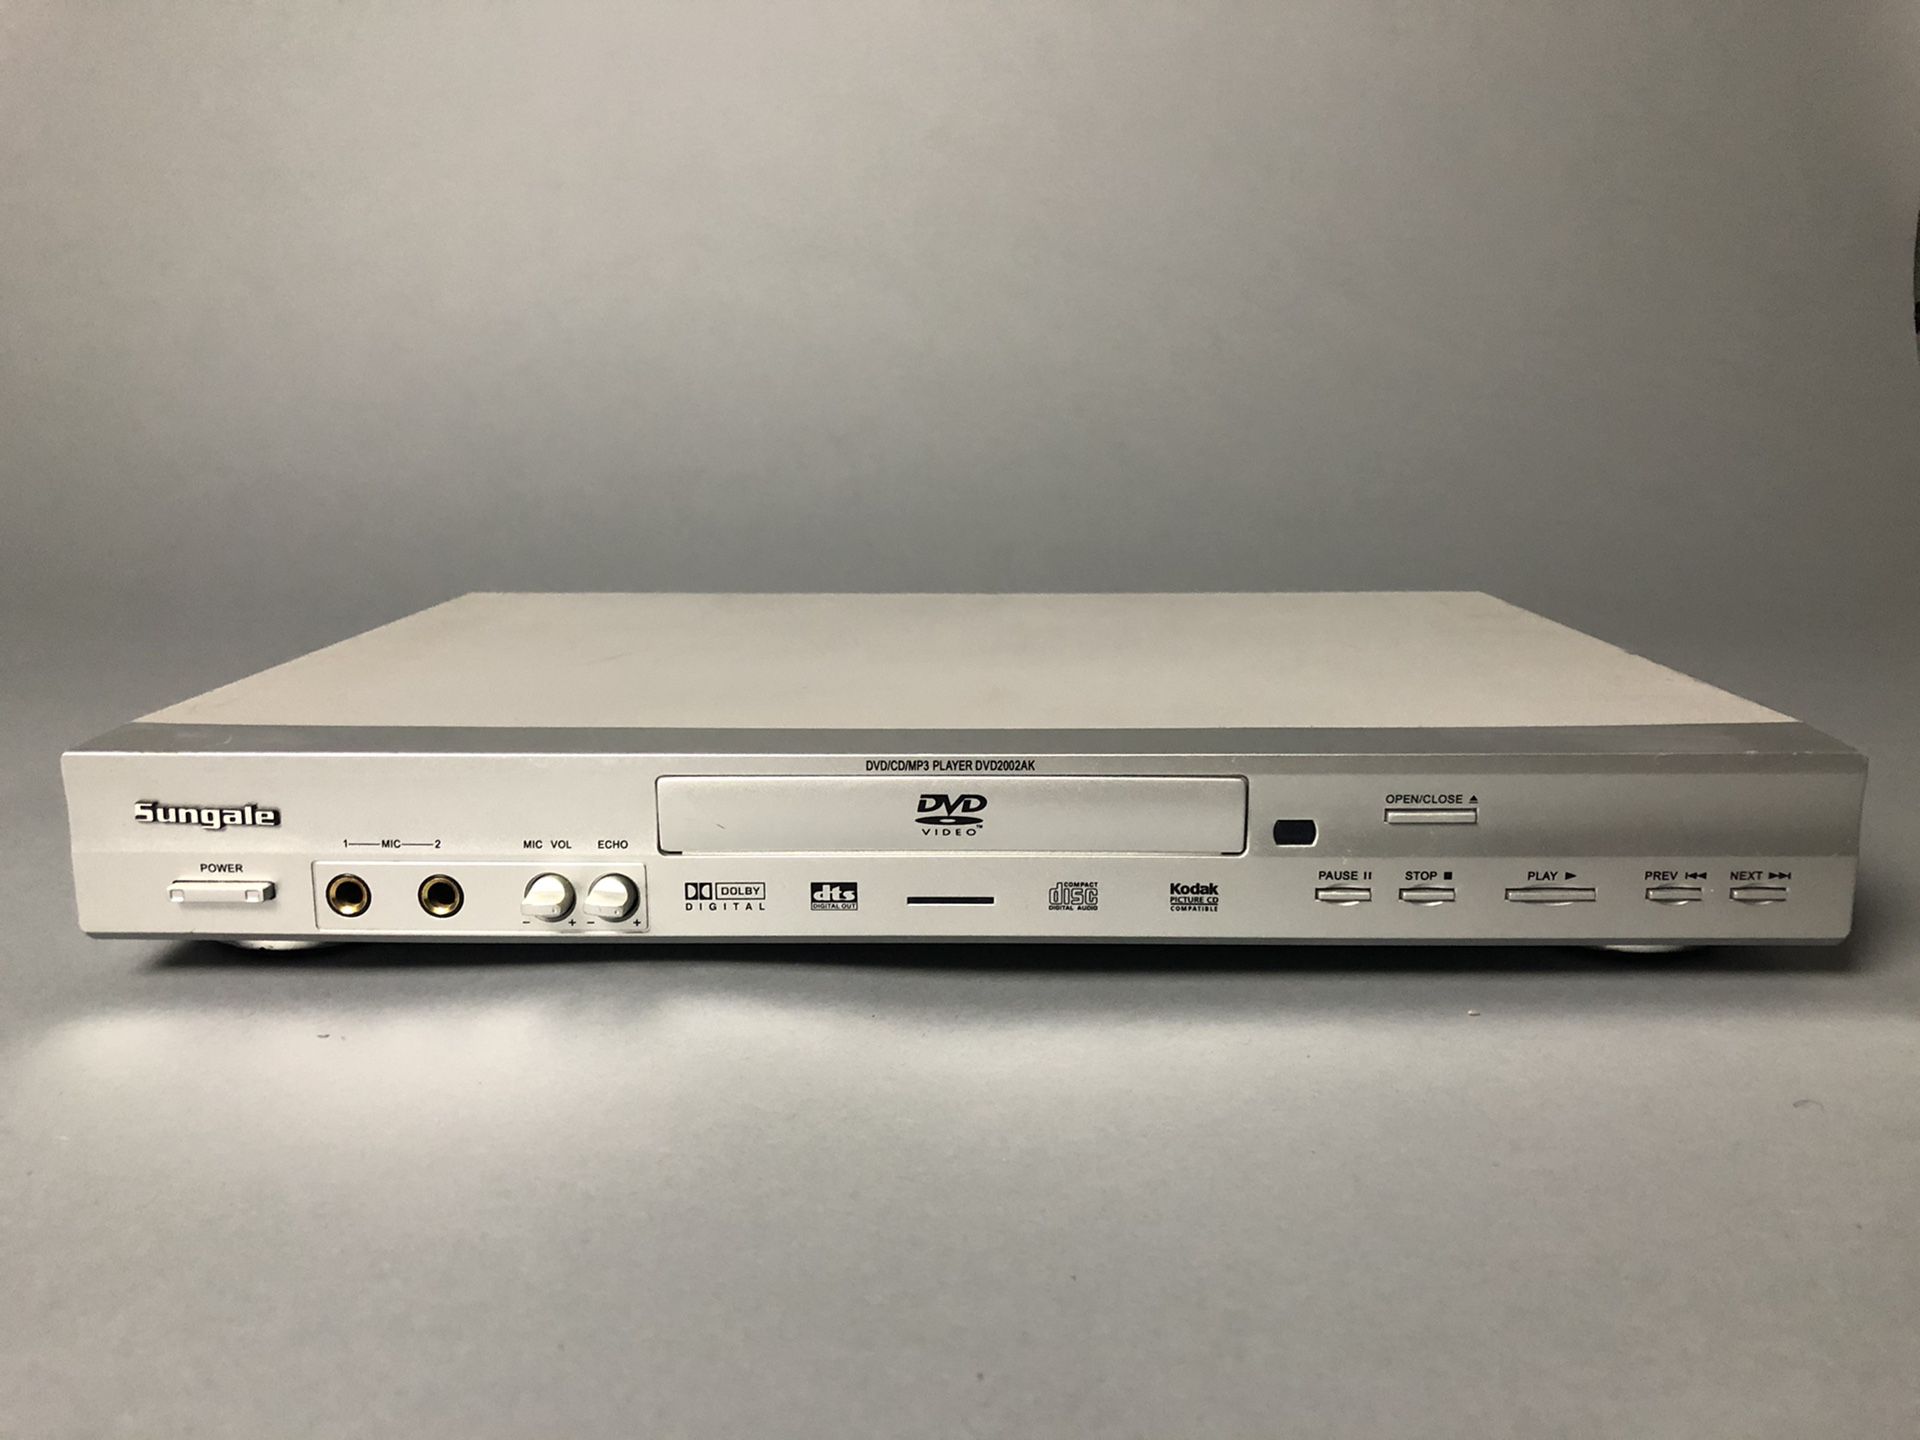 Sungale DVD Player